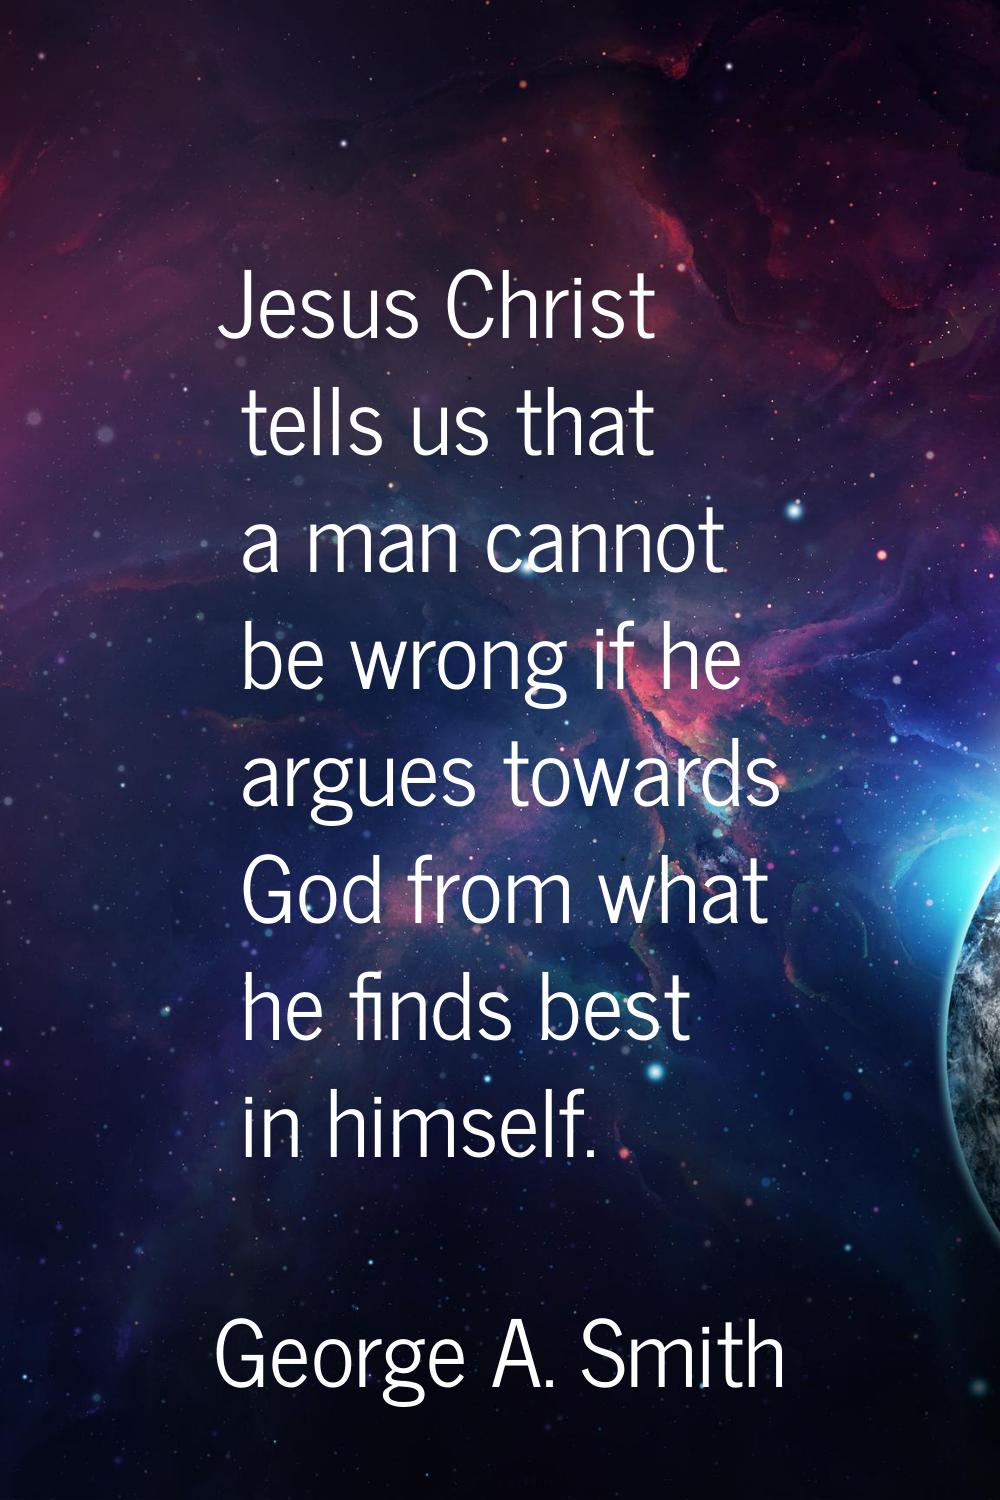 Jesus Christ tells us that a man cannot be wrong if he argues towards God from what he finds best i